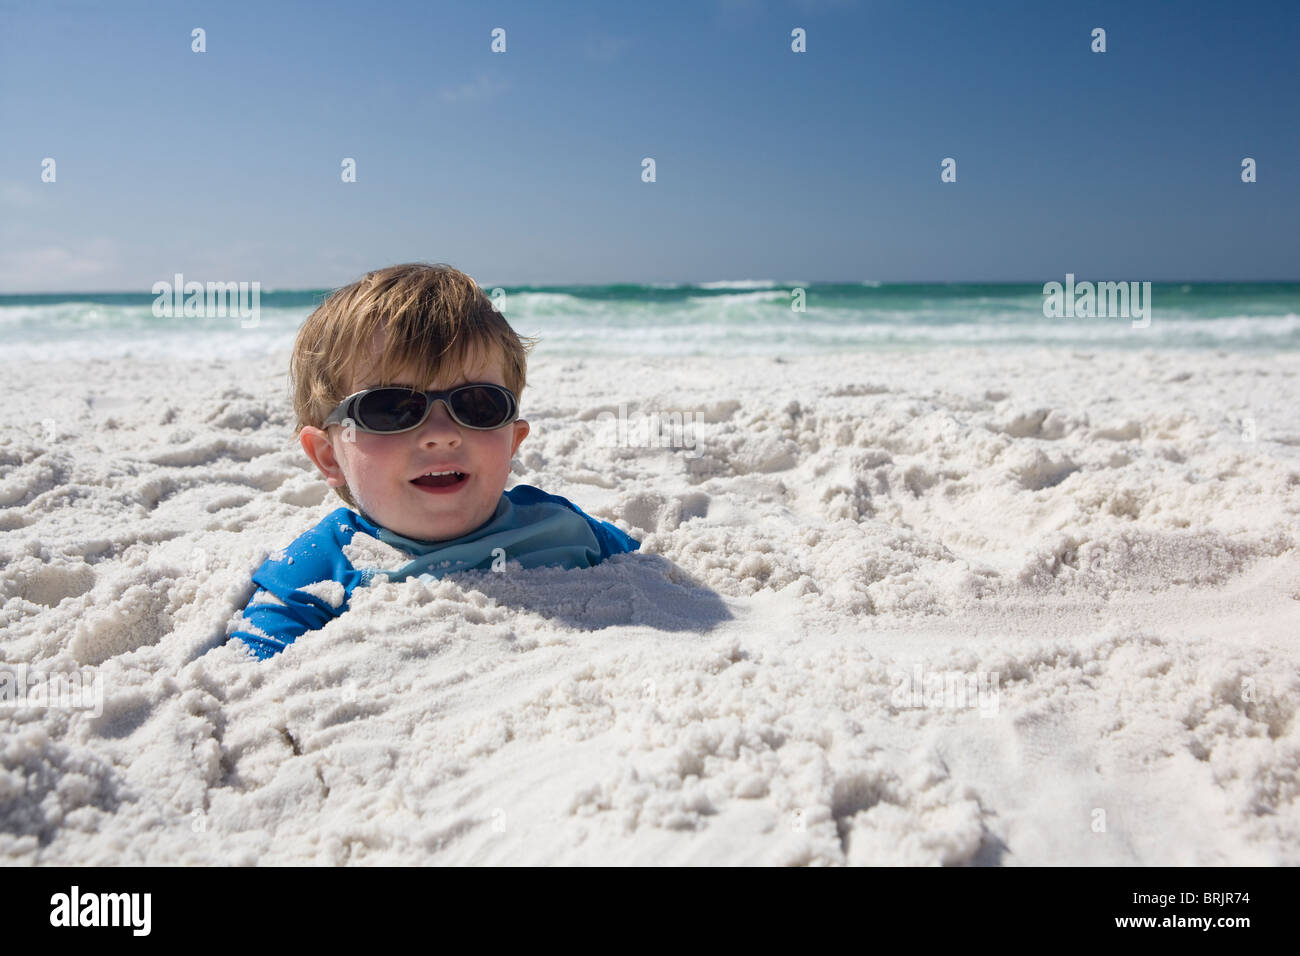 A little boy with sunglasses is buried in the sand up to his head with blue sky and ocean in the background. Stock Photo